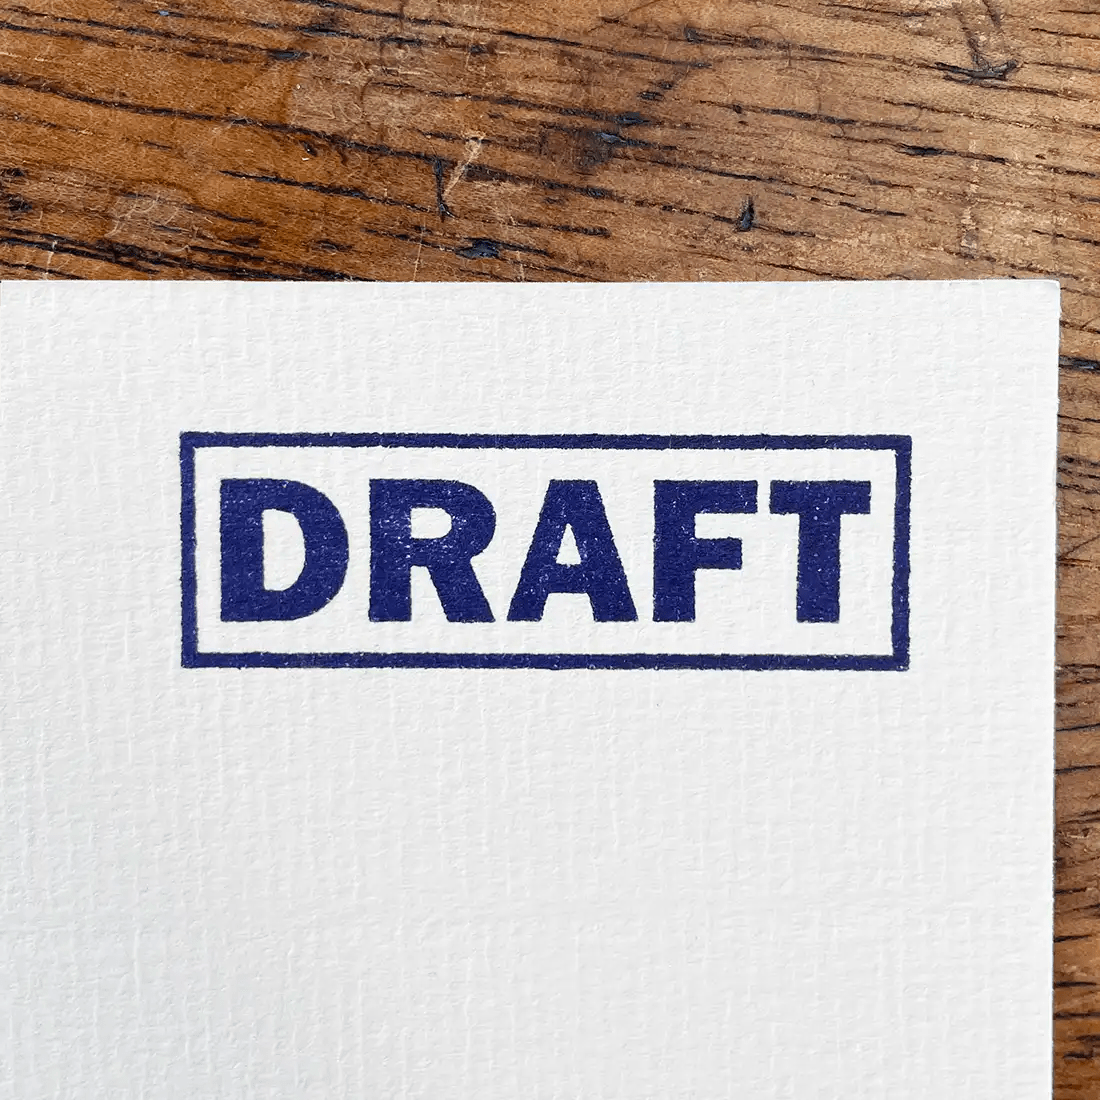 Draft Rubber Stamp